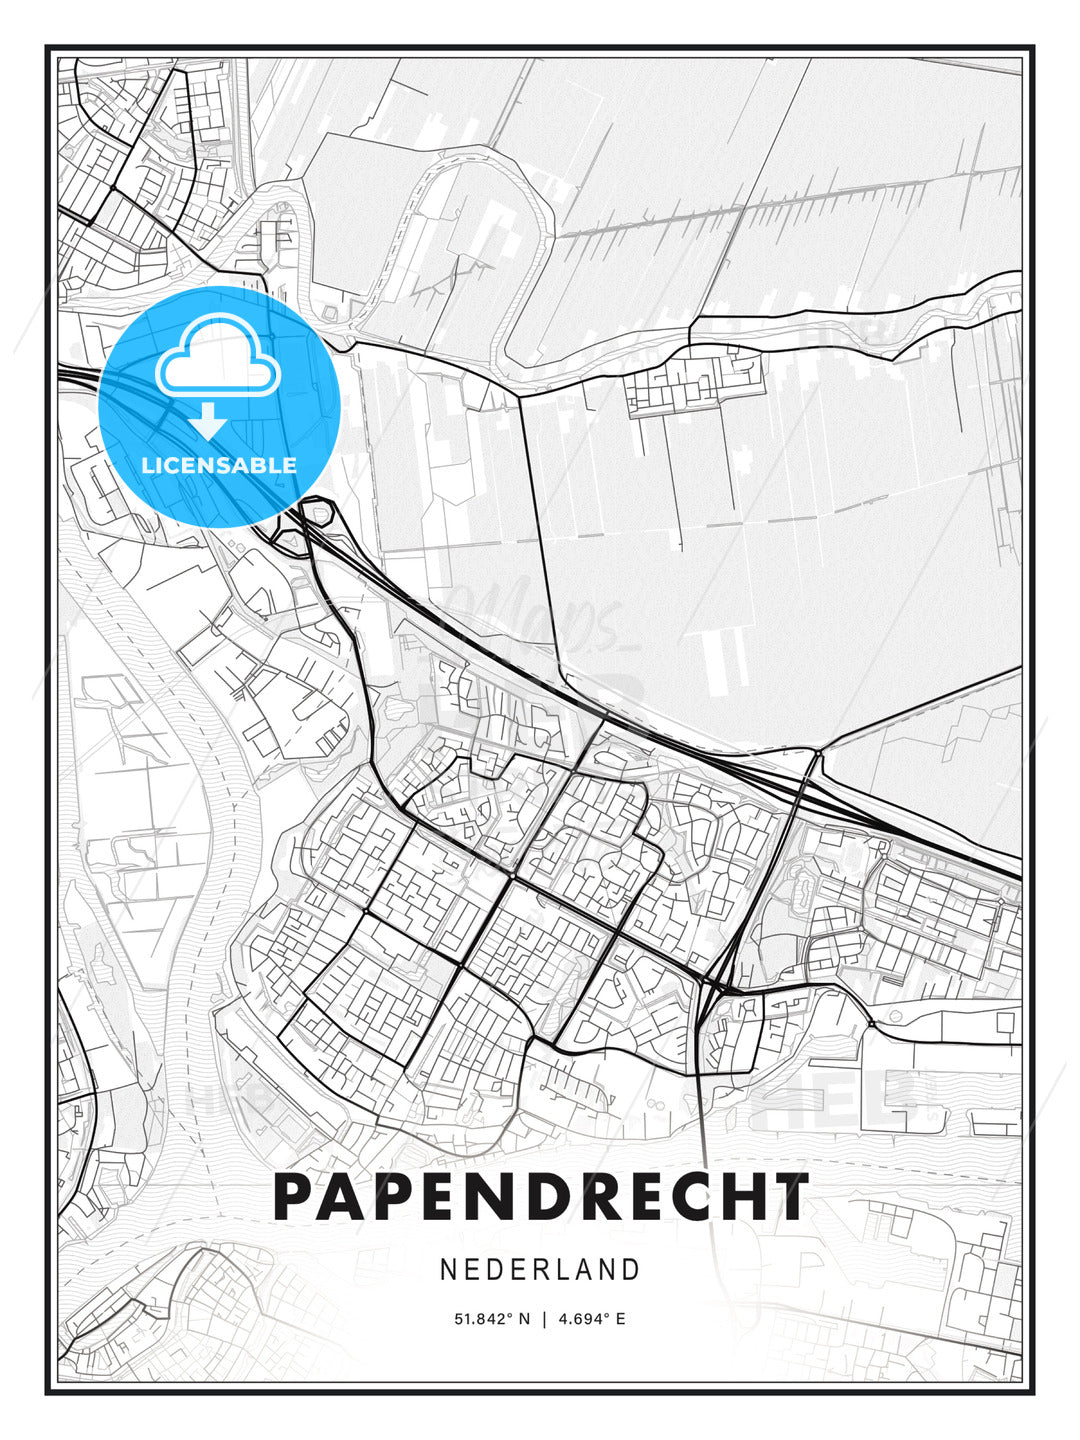 Papendrecht, Netherlands, Modern Print Template in Various Formats - HEBSTREITS Sketches